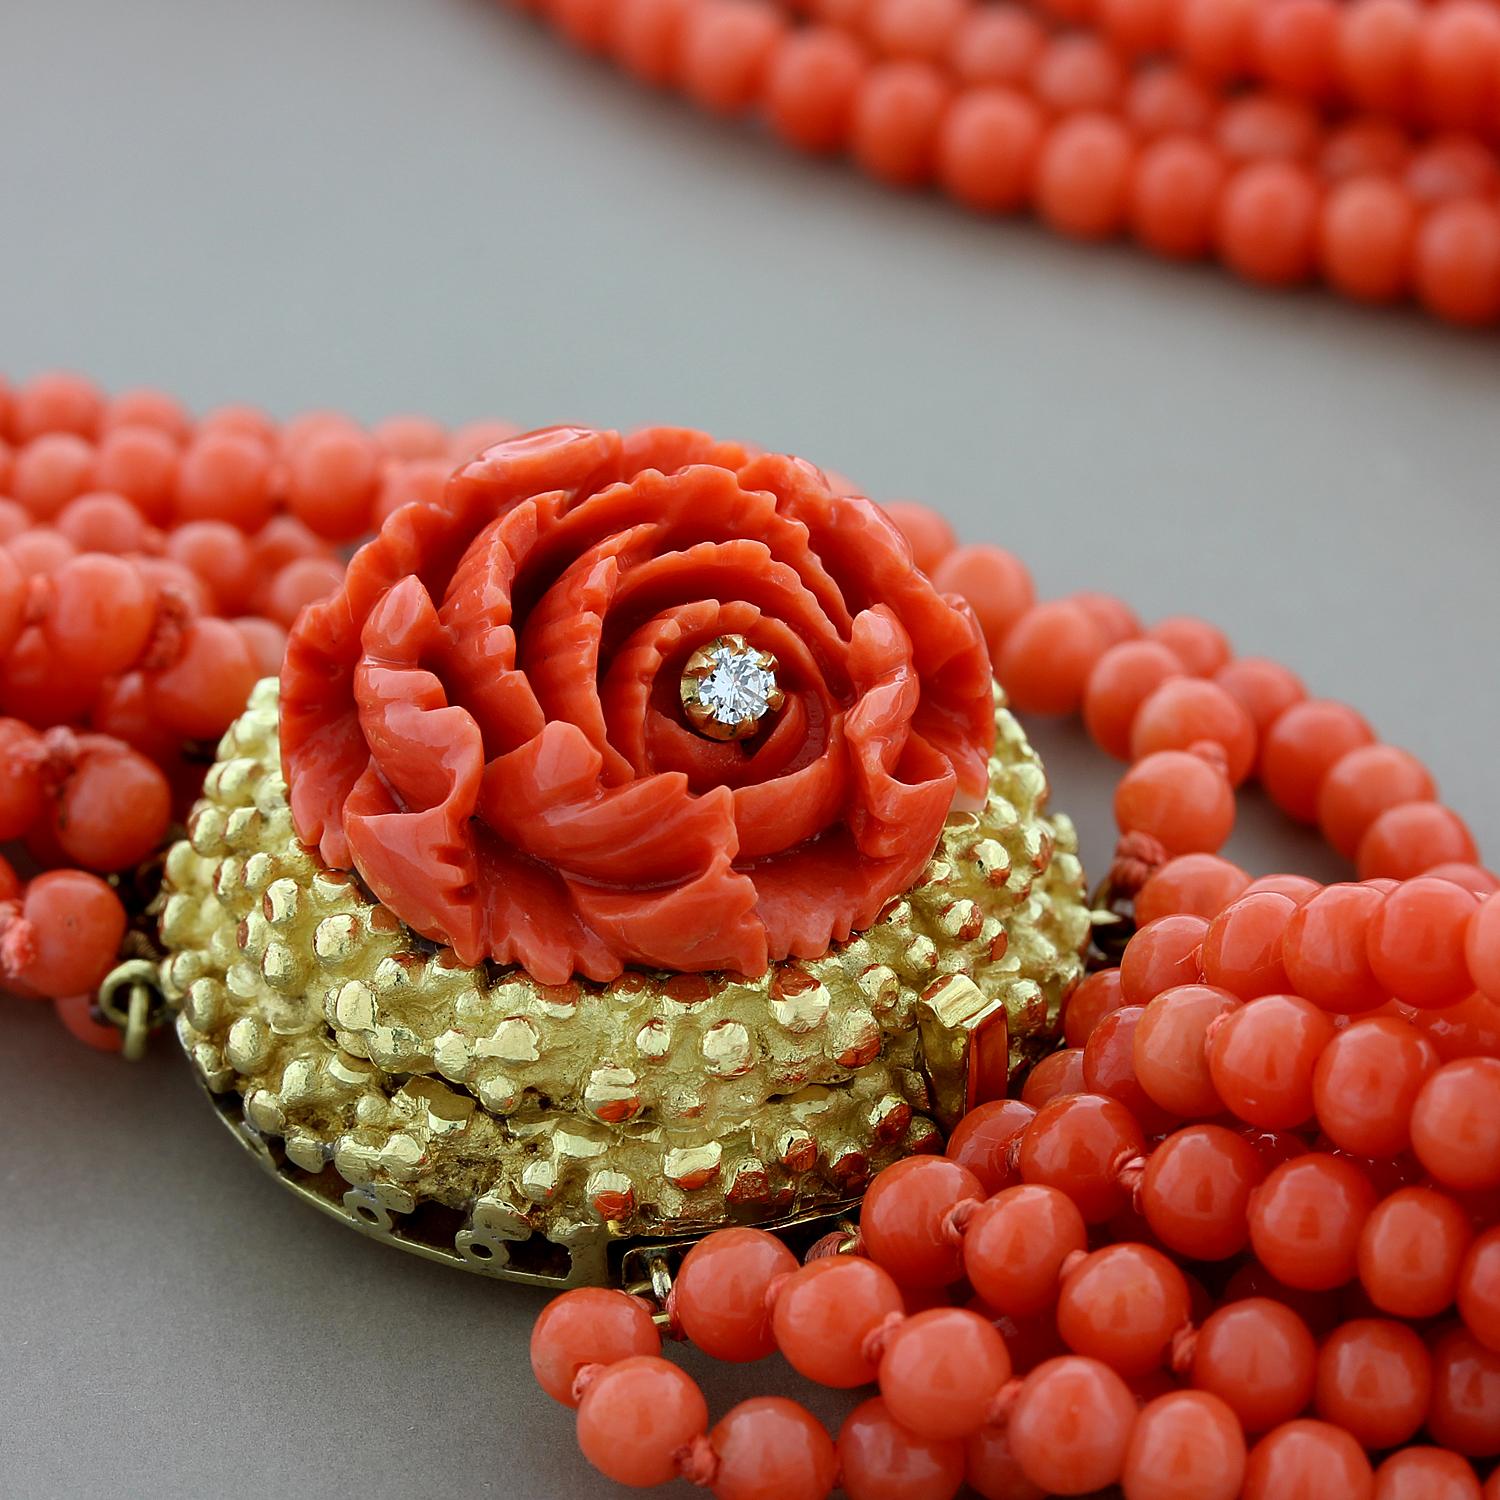 A sophisticated coral necklace accentuated by a coral rosette with a single round cut diamond set in the center. The coral rose sits on a 18K yellow gold mounting which complements the rich red color of the coral. The seamless box clasp ensures for